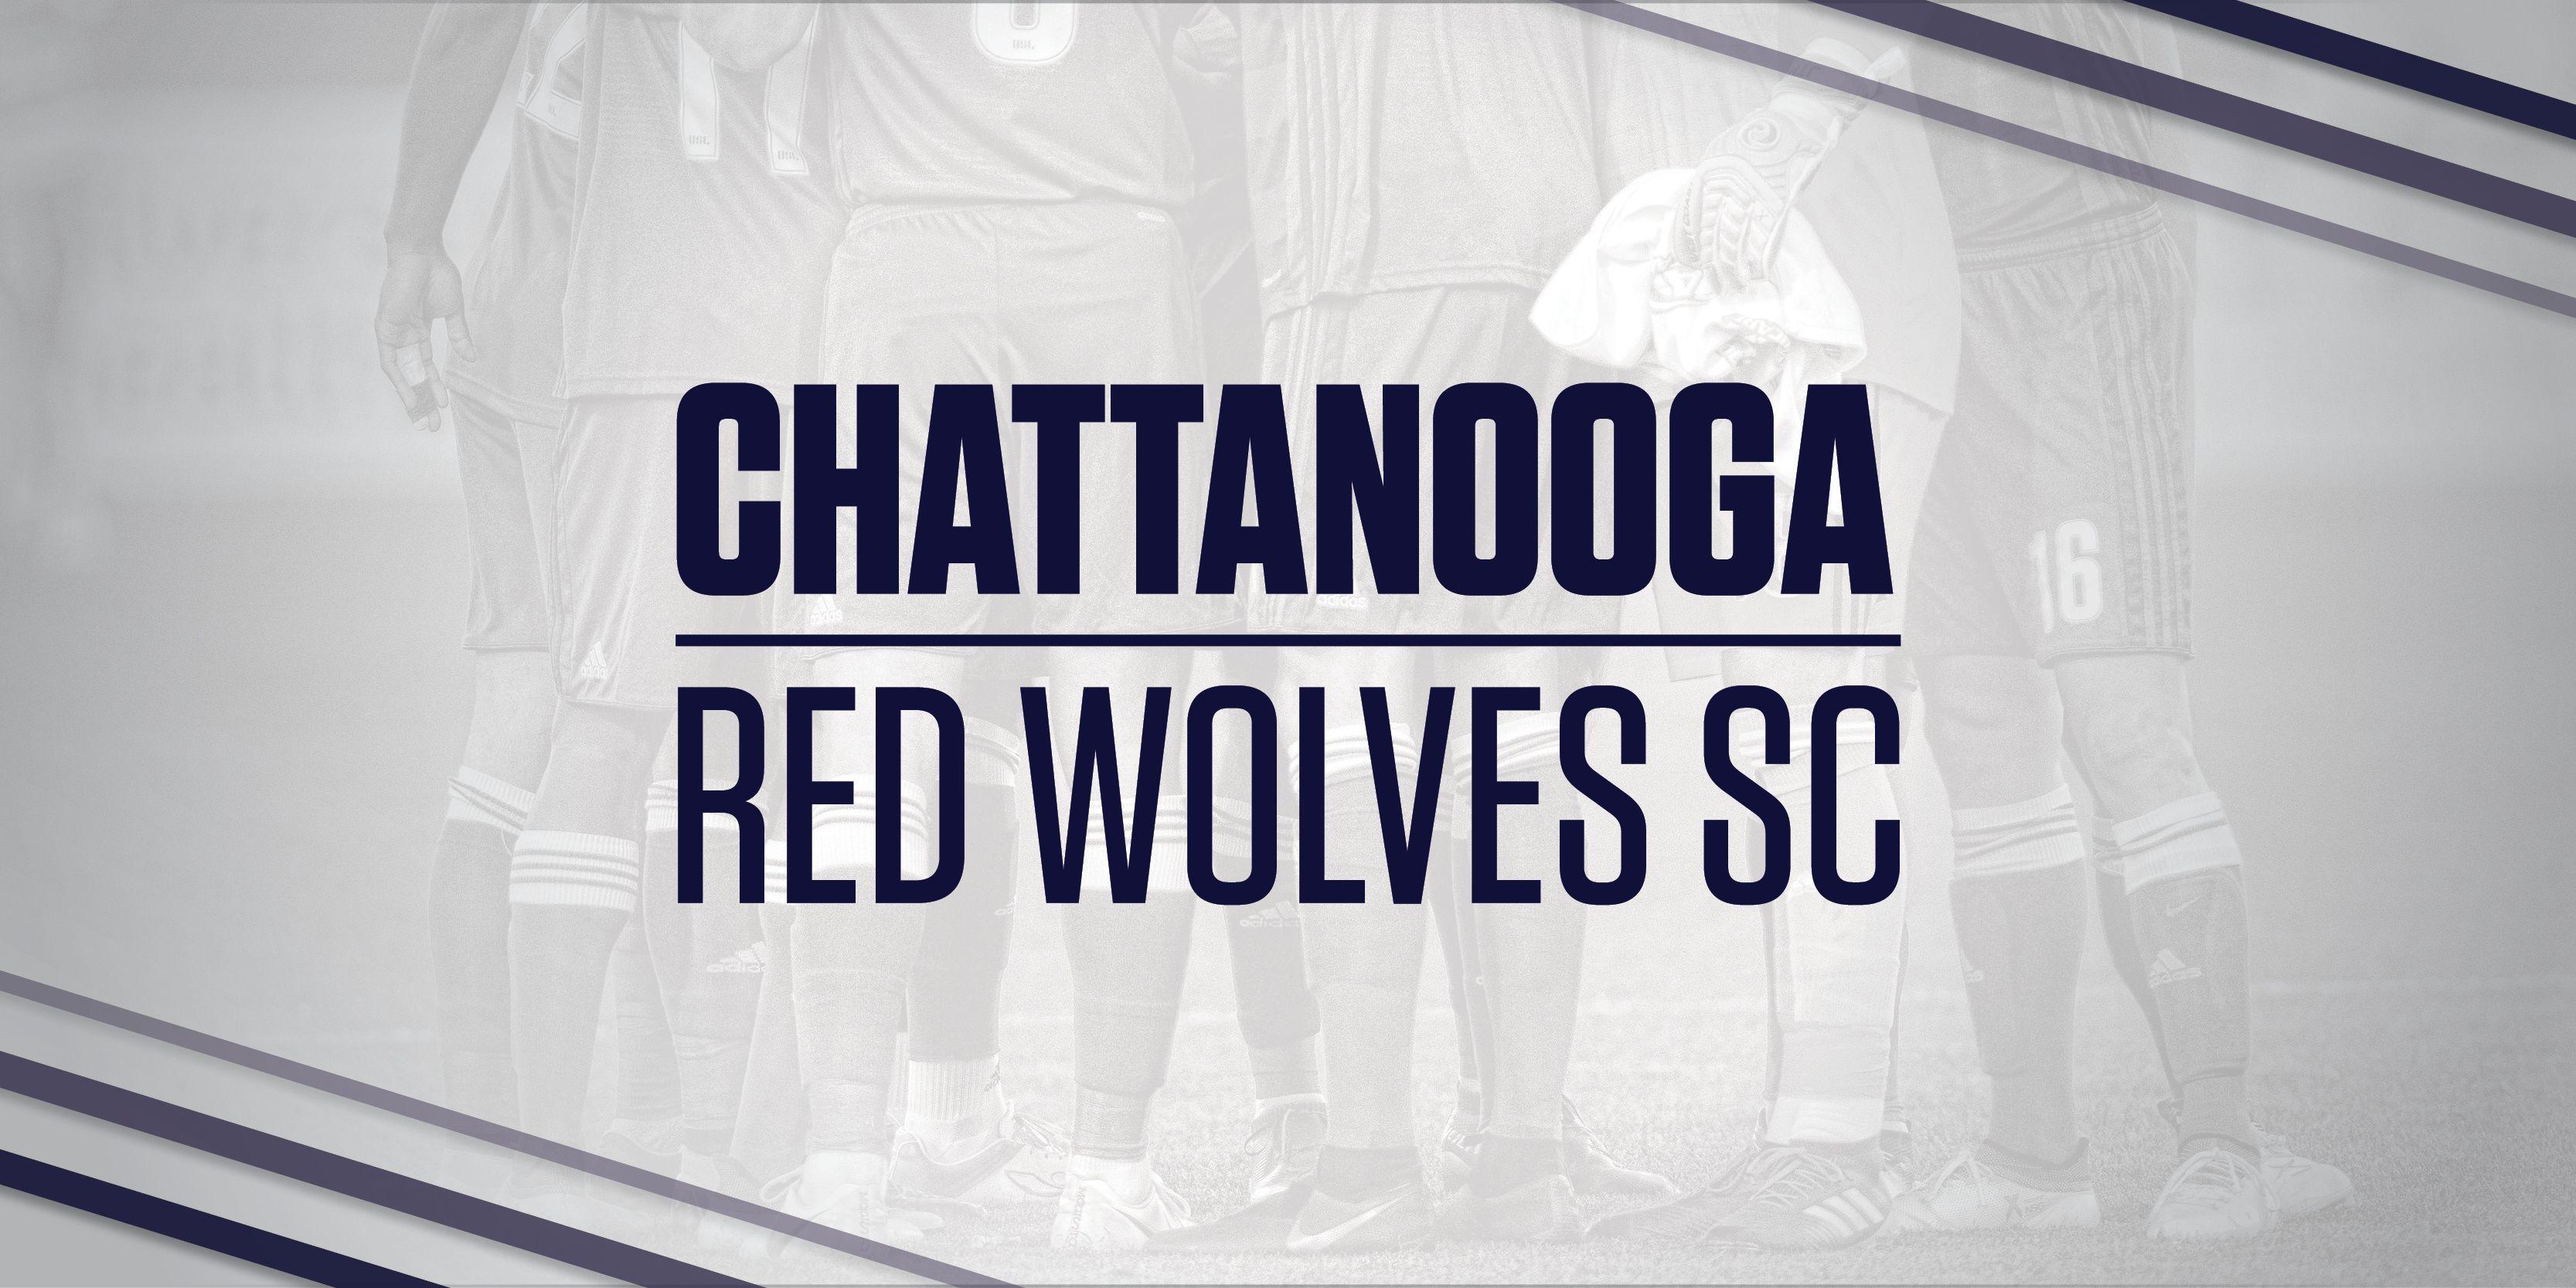 Red Wolf Soccer Logo - Chattanooga's Pro Team Announces Chattanooga Red Wolves SC as Team Name